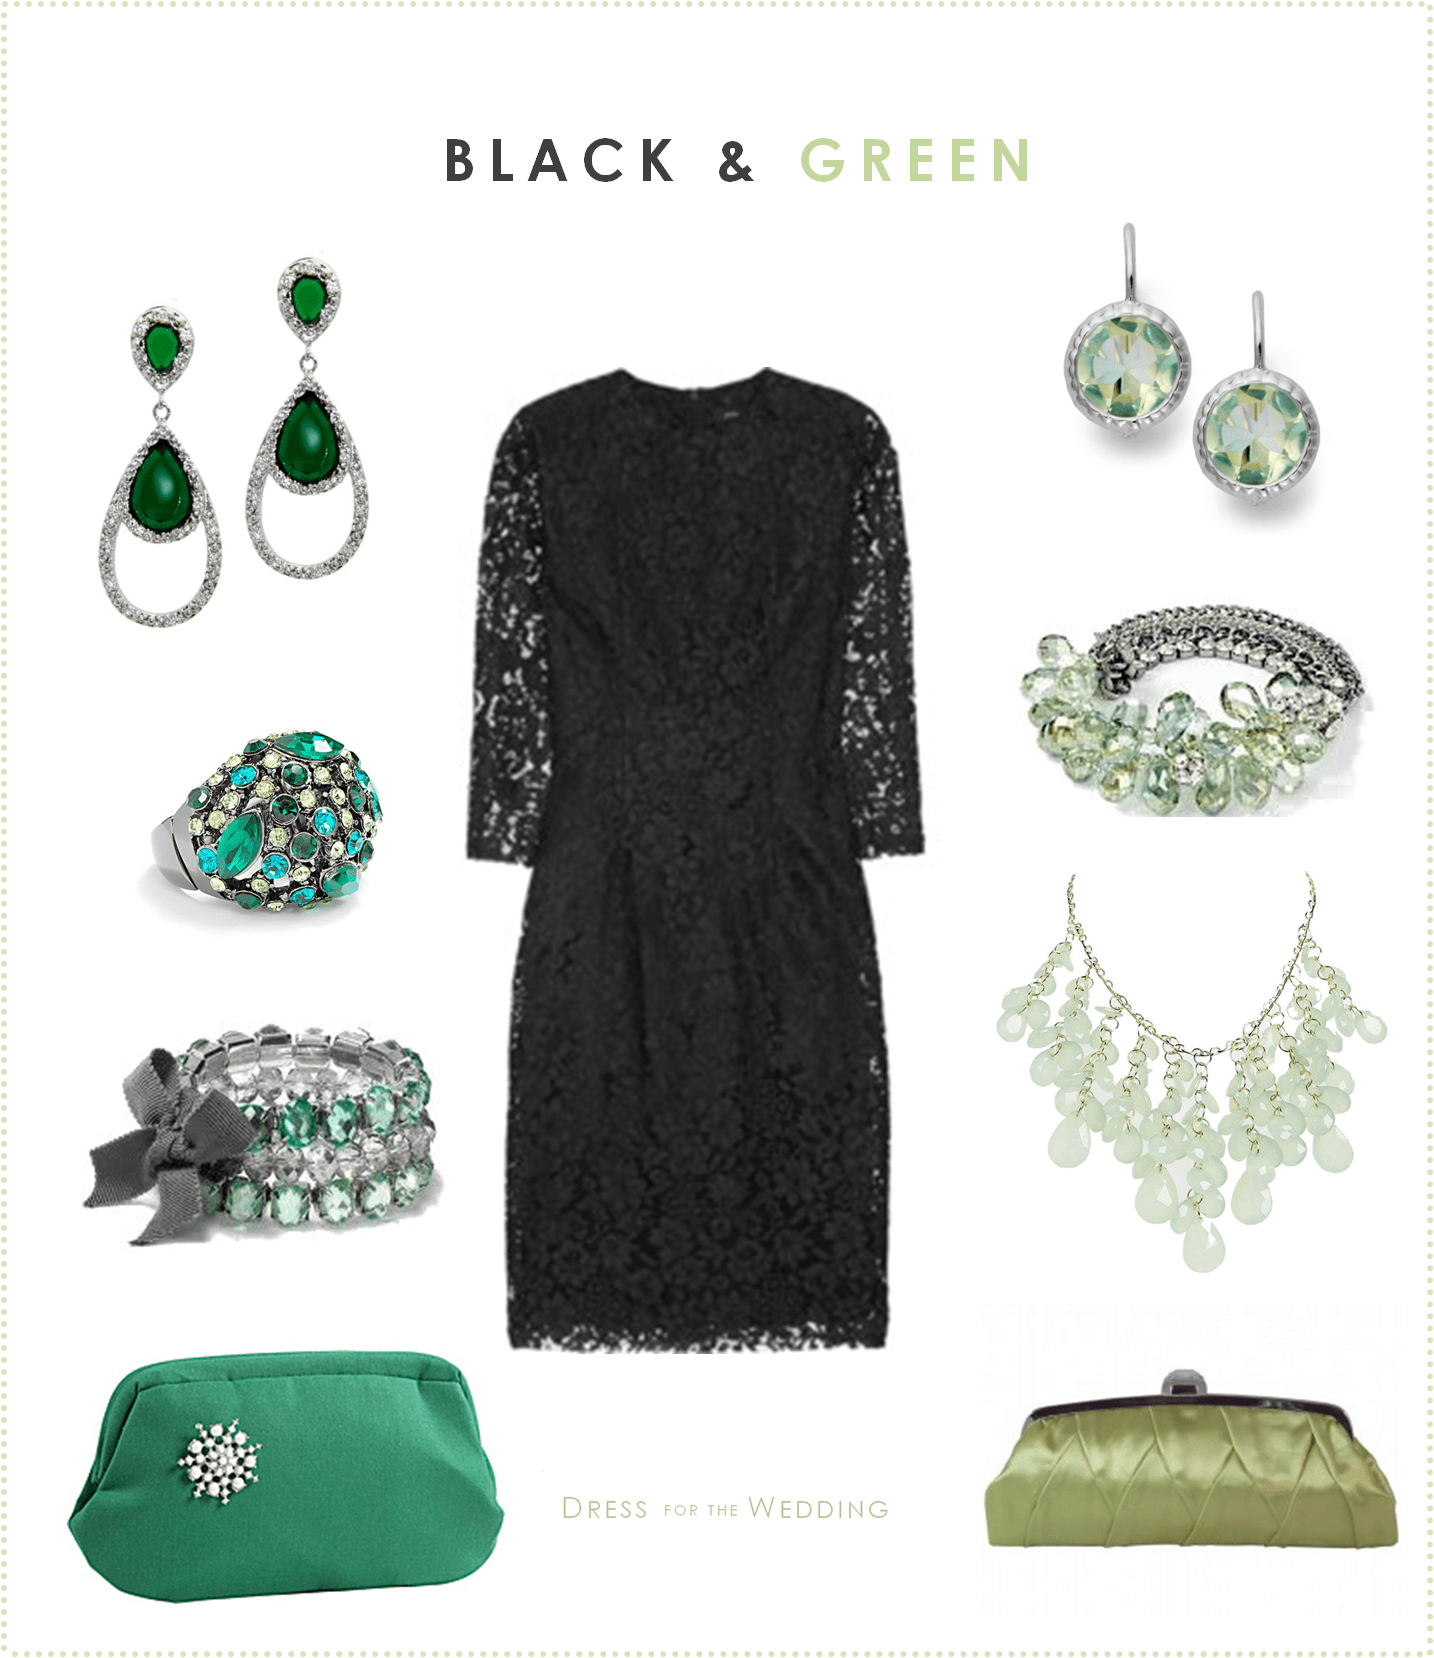 Black Lace Dress with Green Accessories